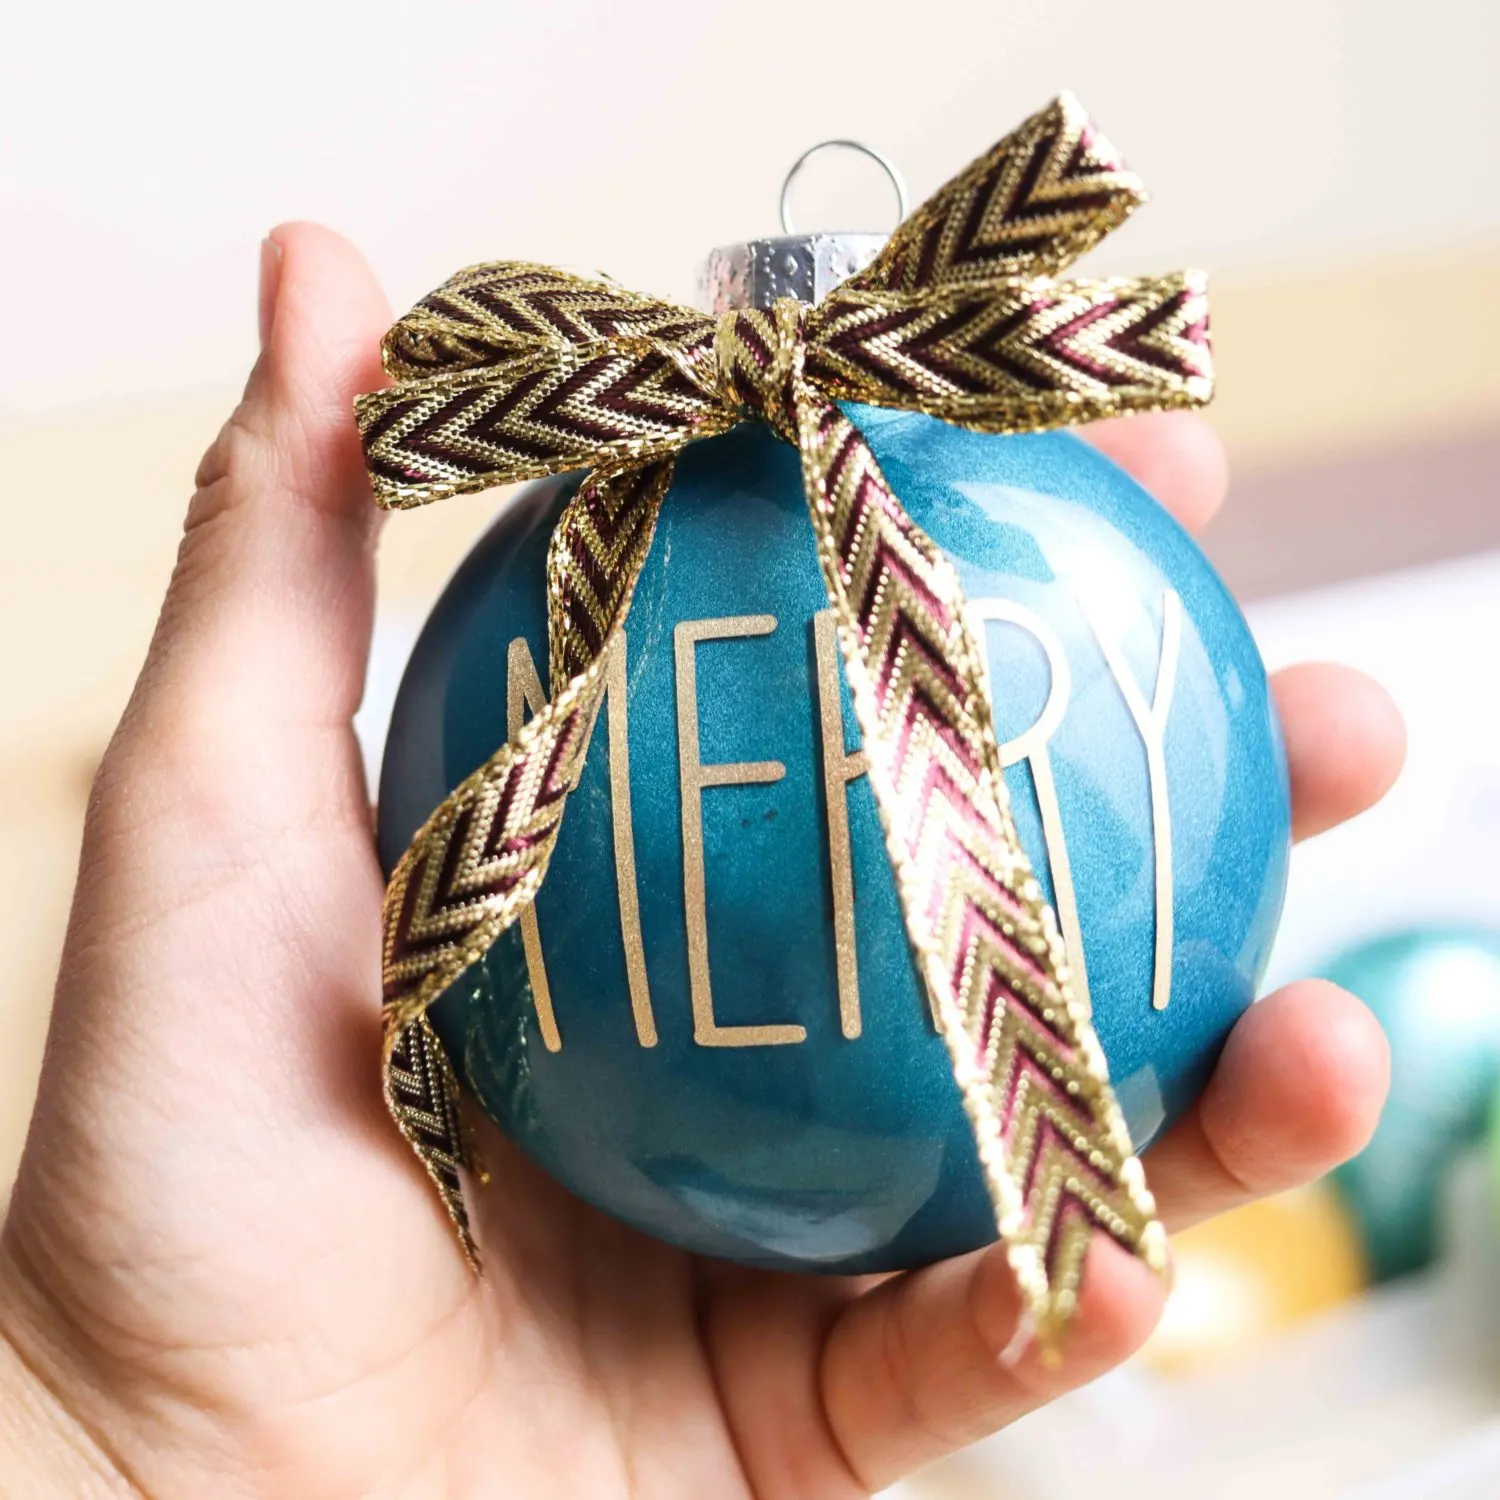 Christmas Ornament made with teal metallic pain and gold vinyl